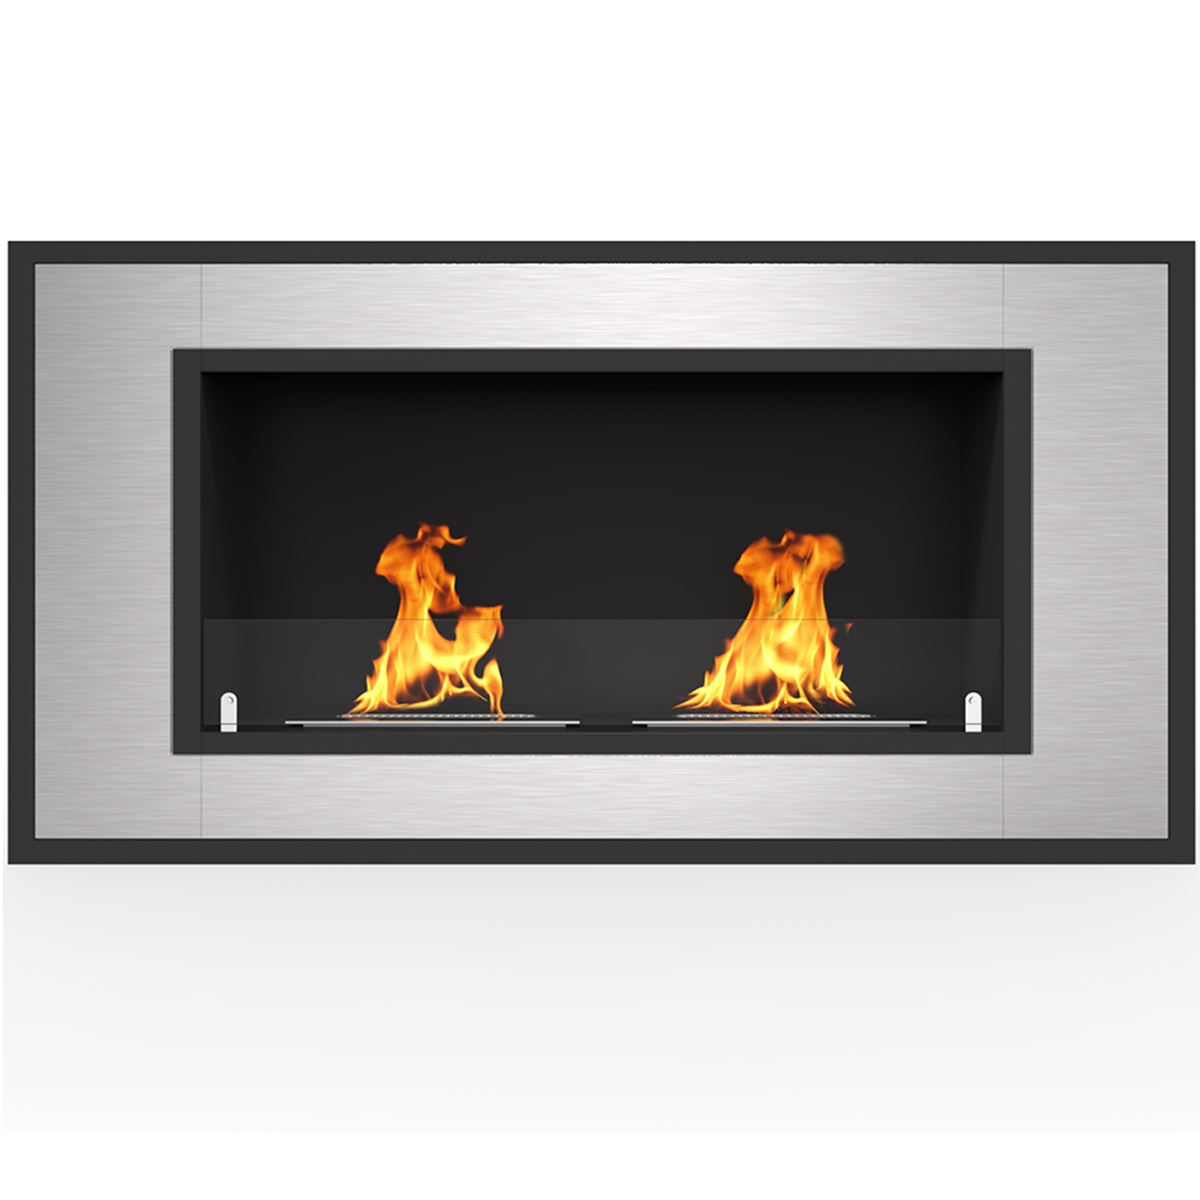 Regal Flame Cynergy 36" Ventless Built In Wall Recessed Bio Ethanol Wall Mounted Fireplace Similar Electric Fireplaces, Gas Logs